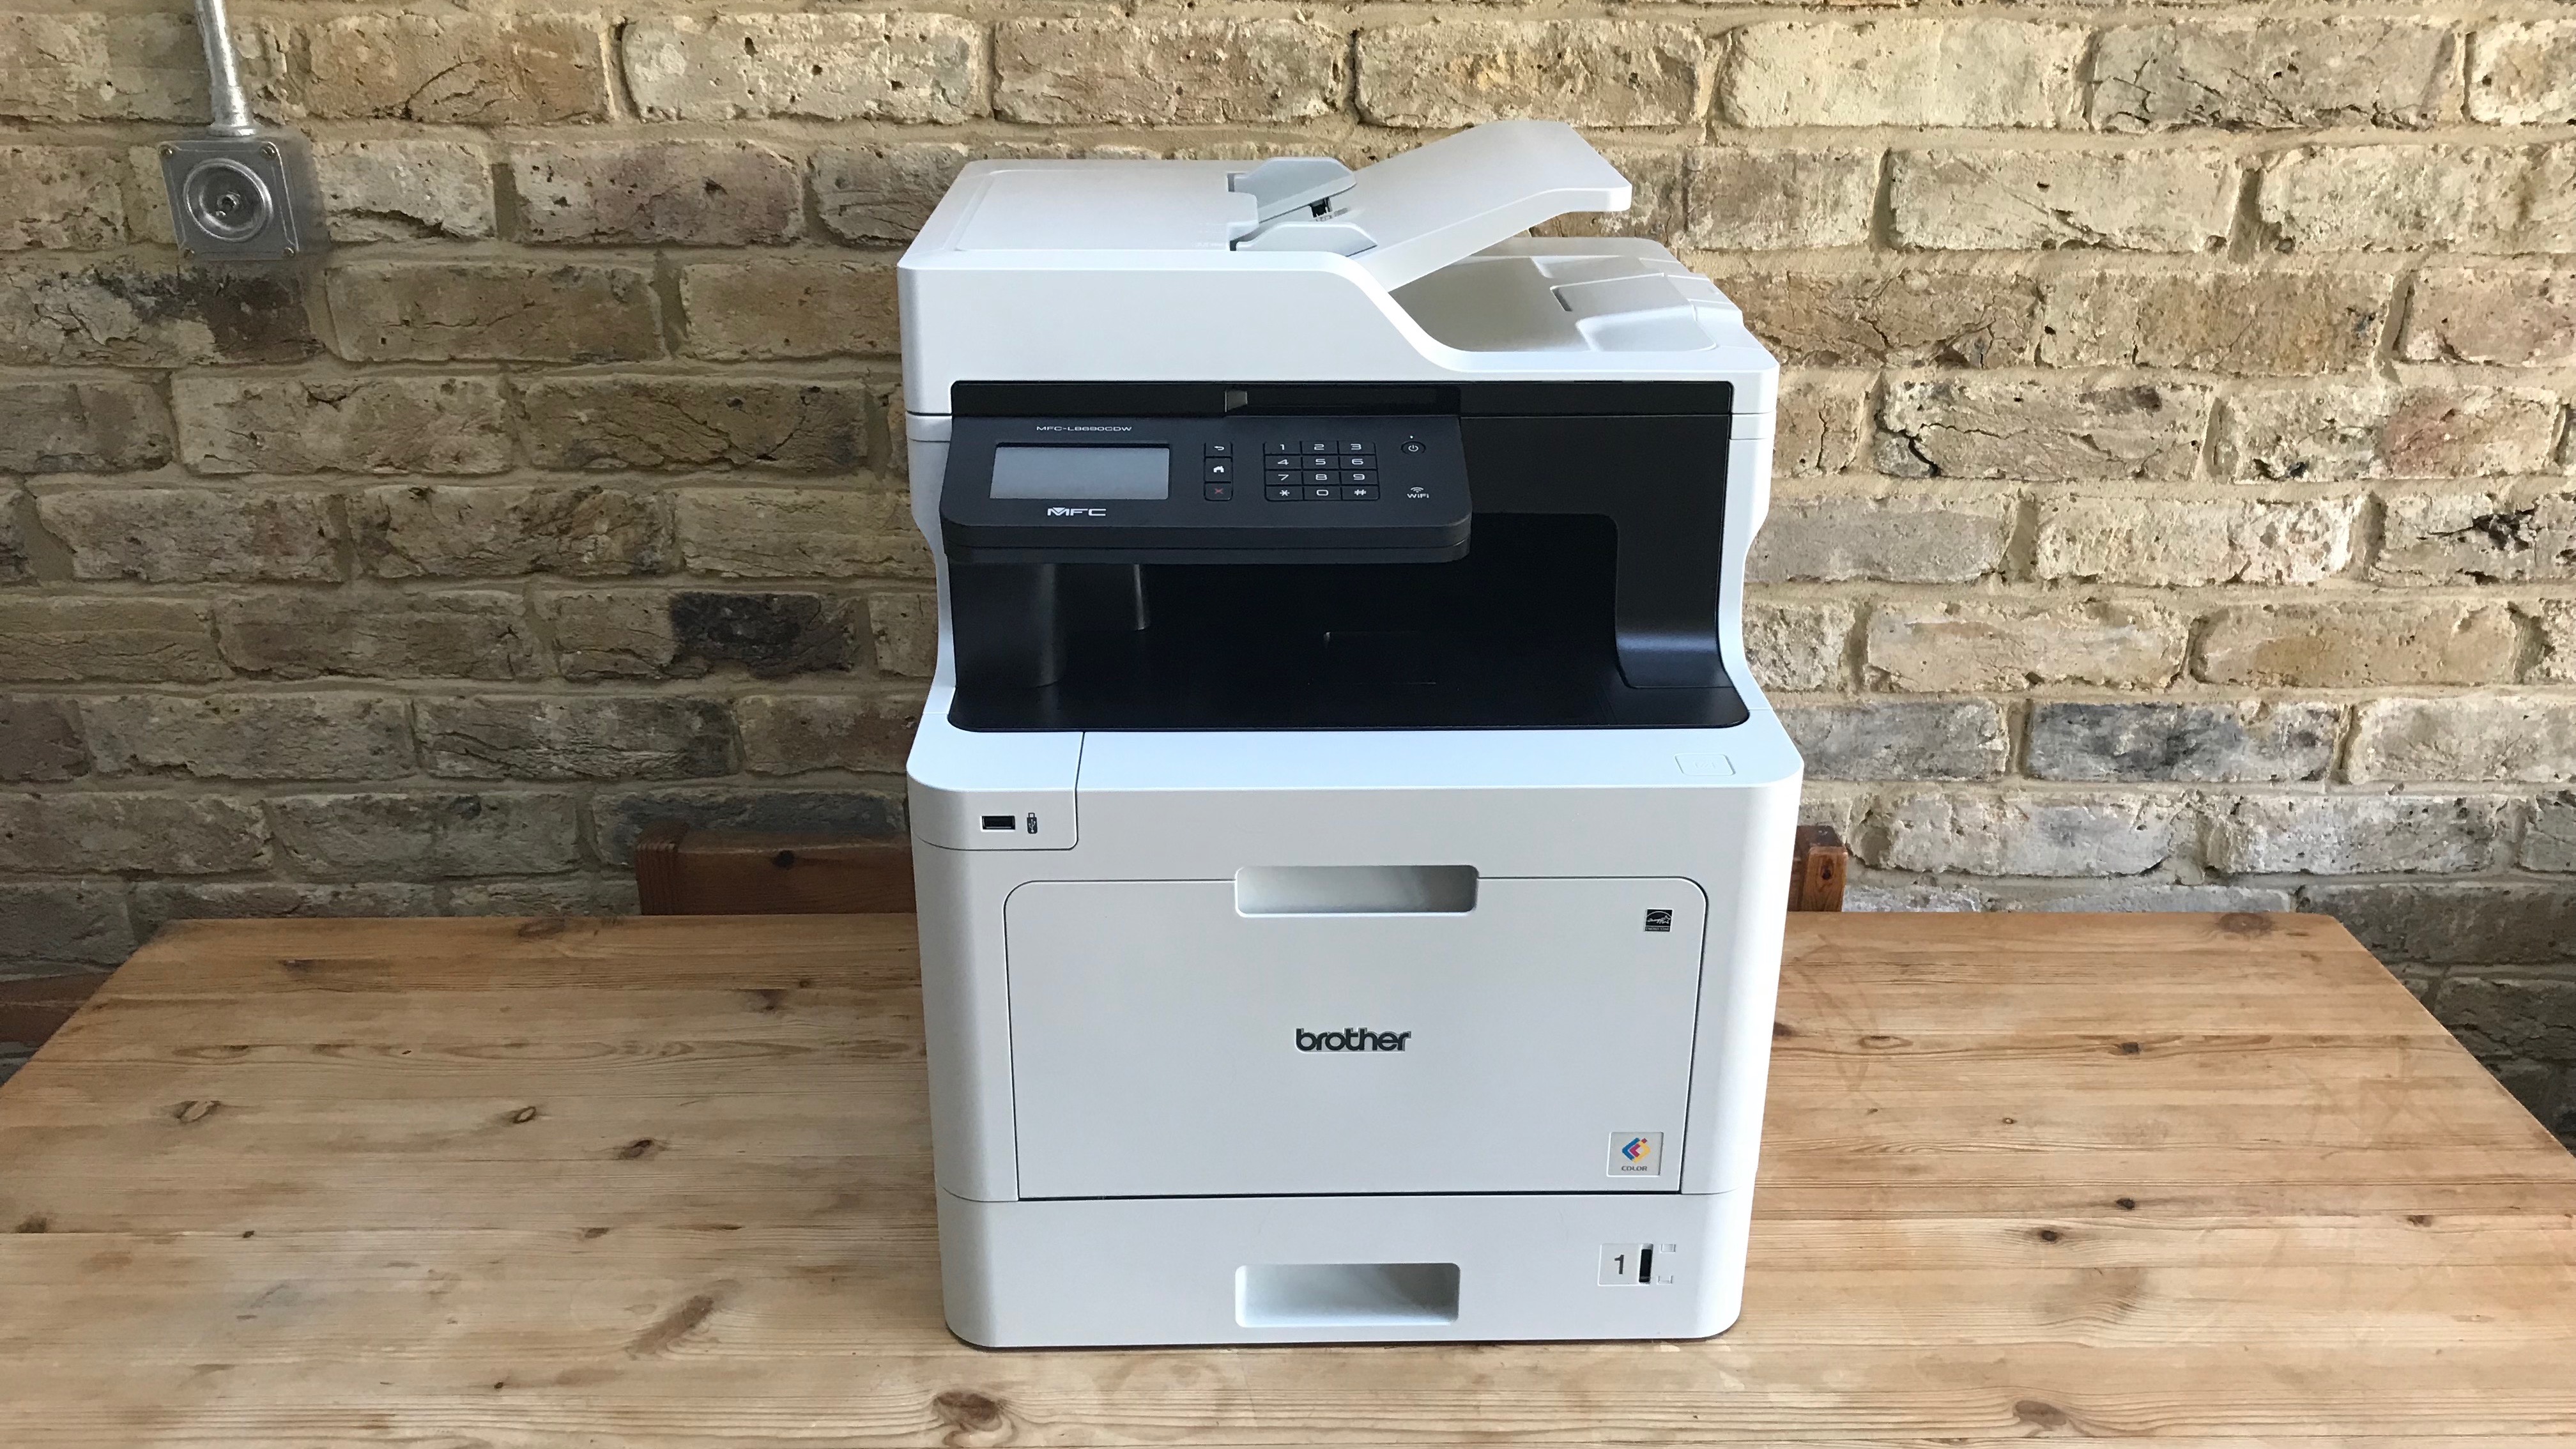 Product  Brother MFC-L8390CDW - multifunction printer - colour